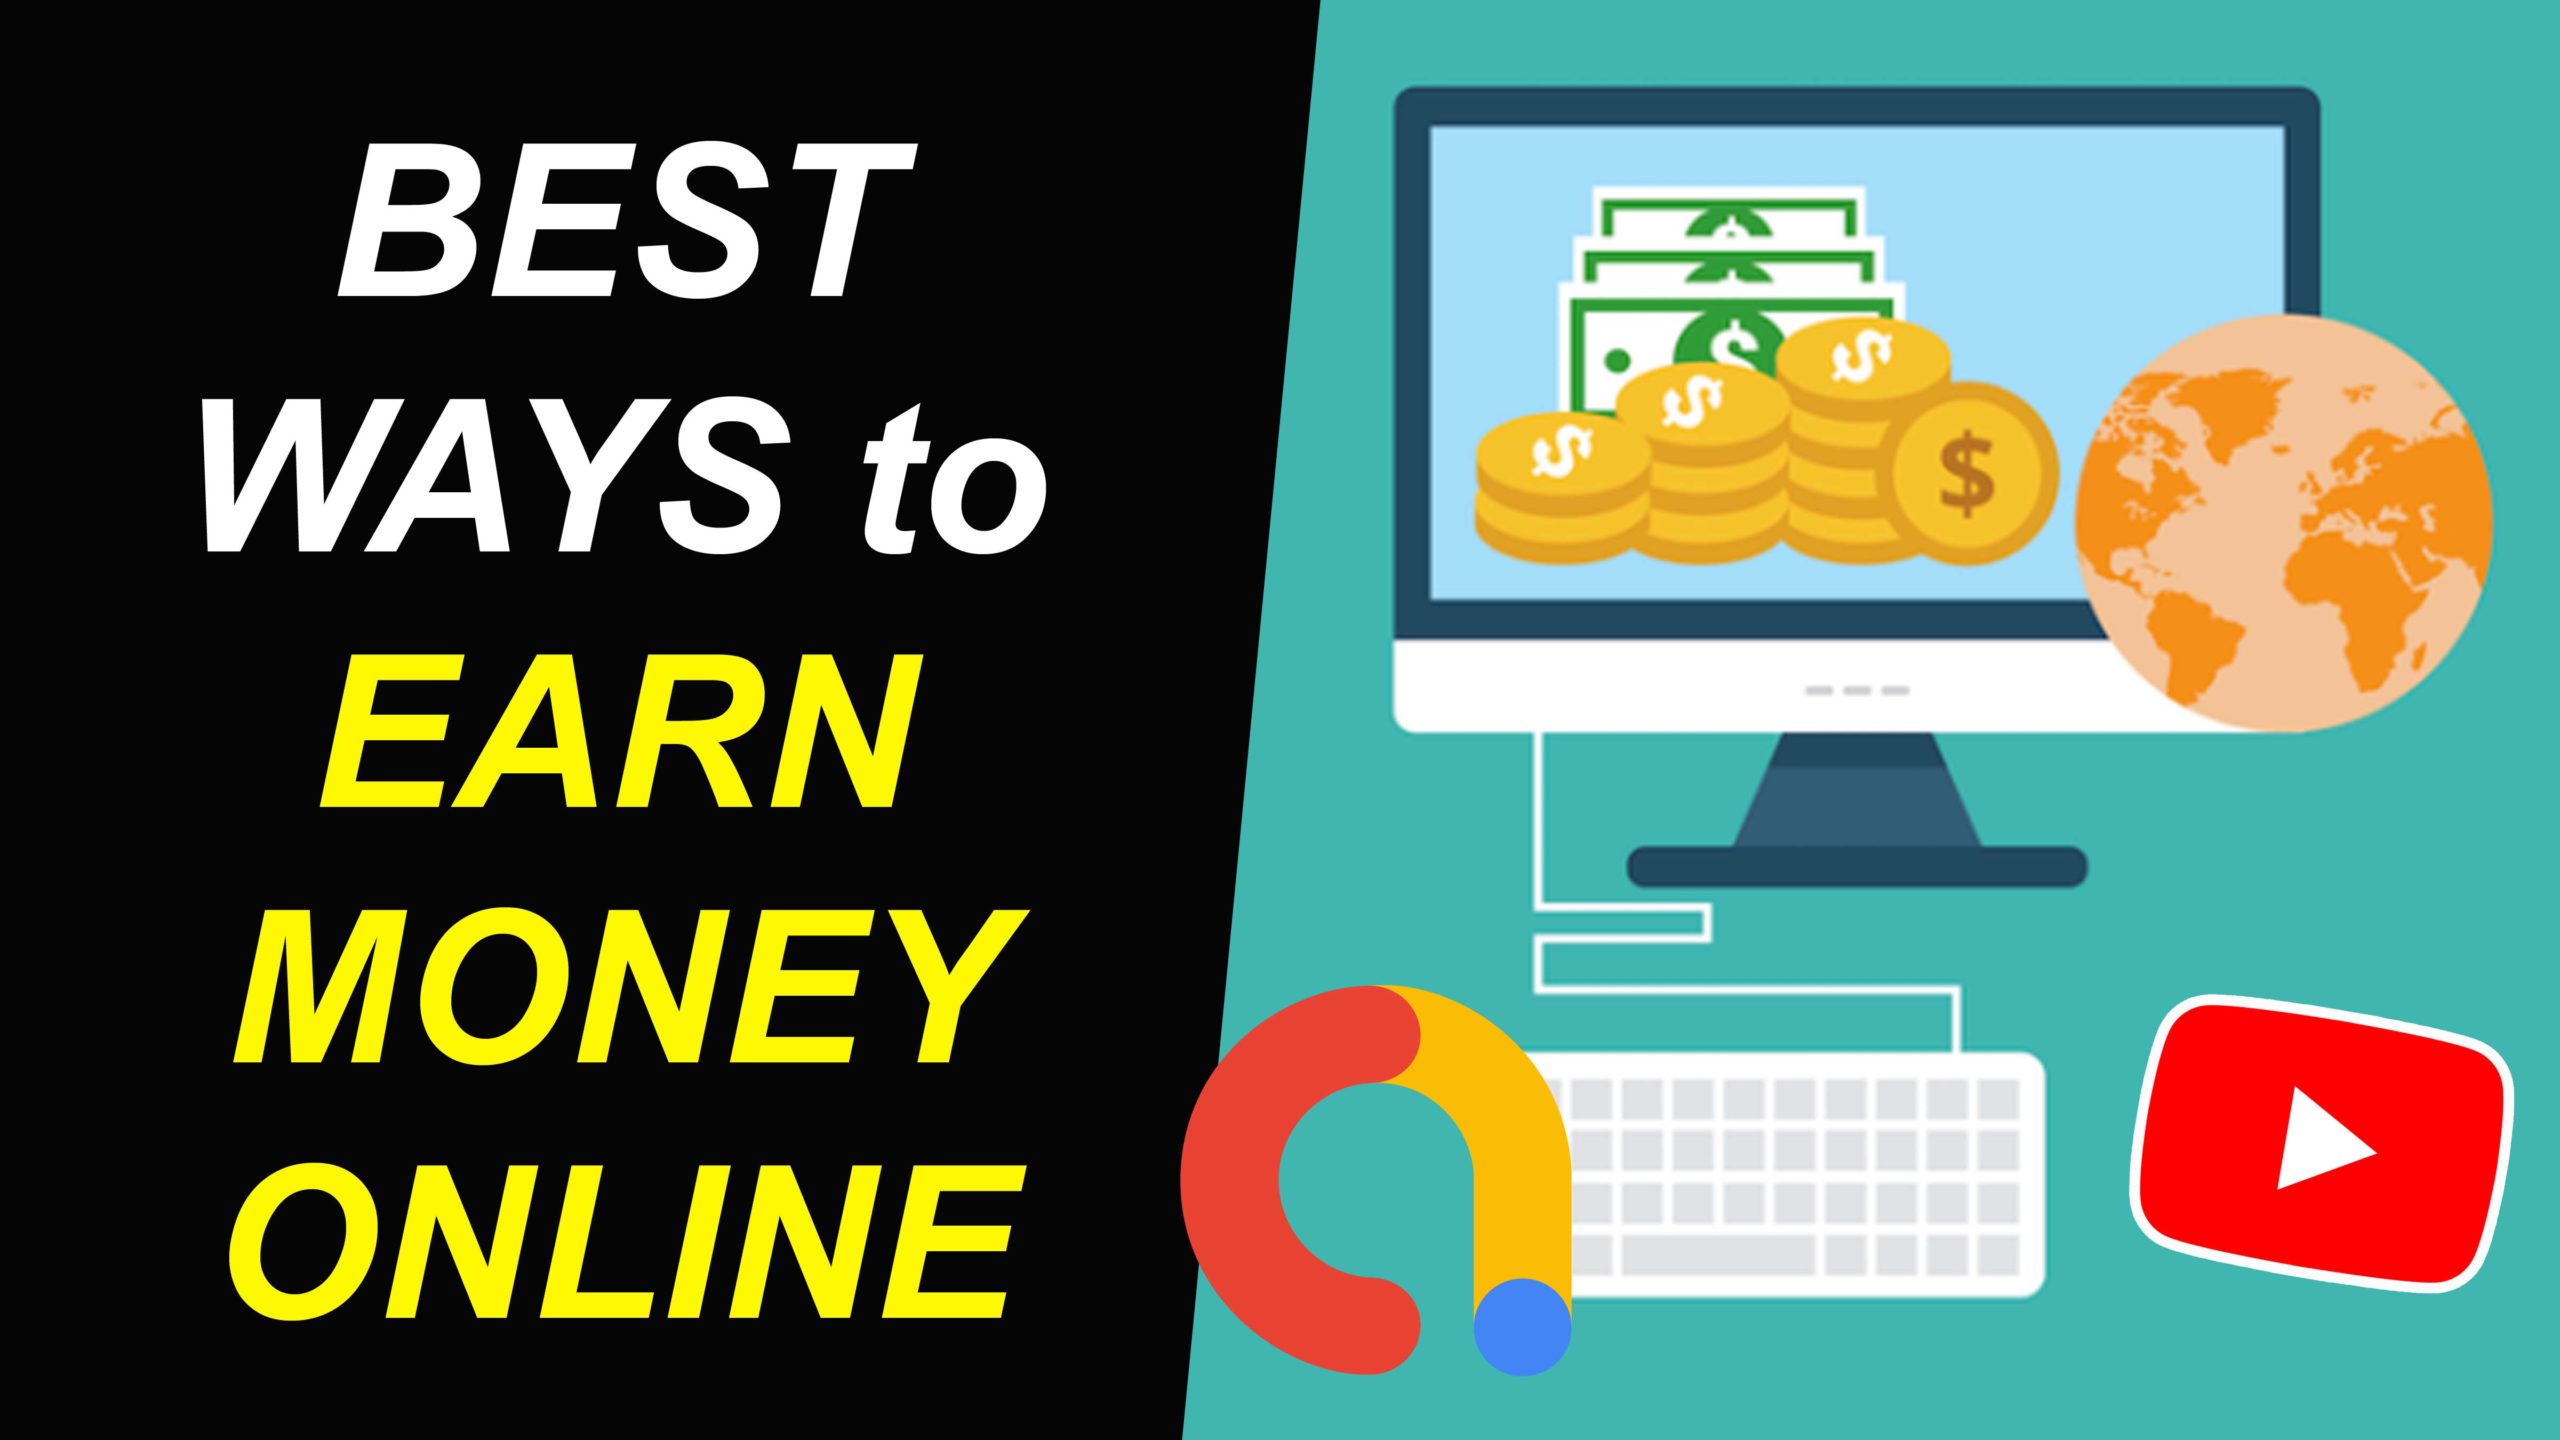 How to earn money online in India without investment for students?